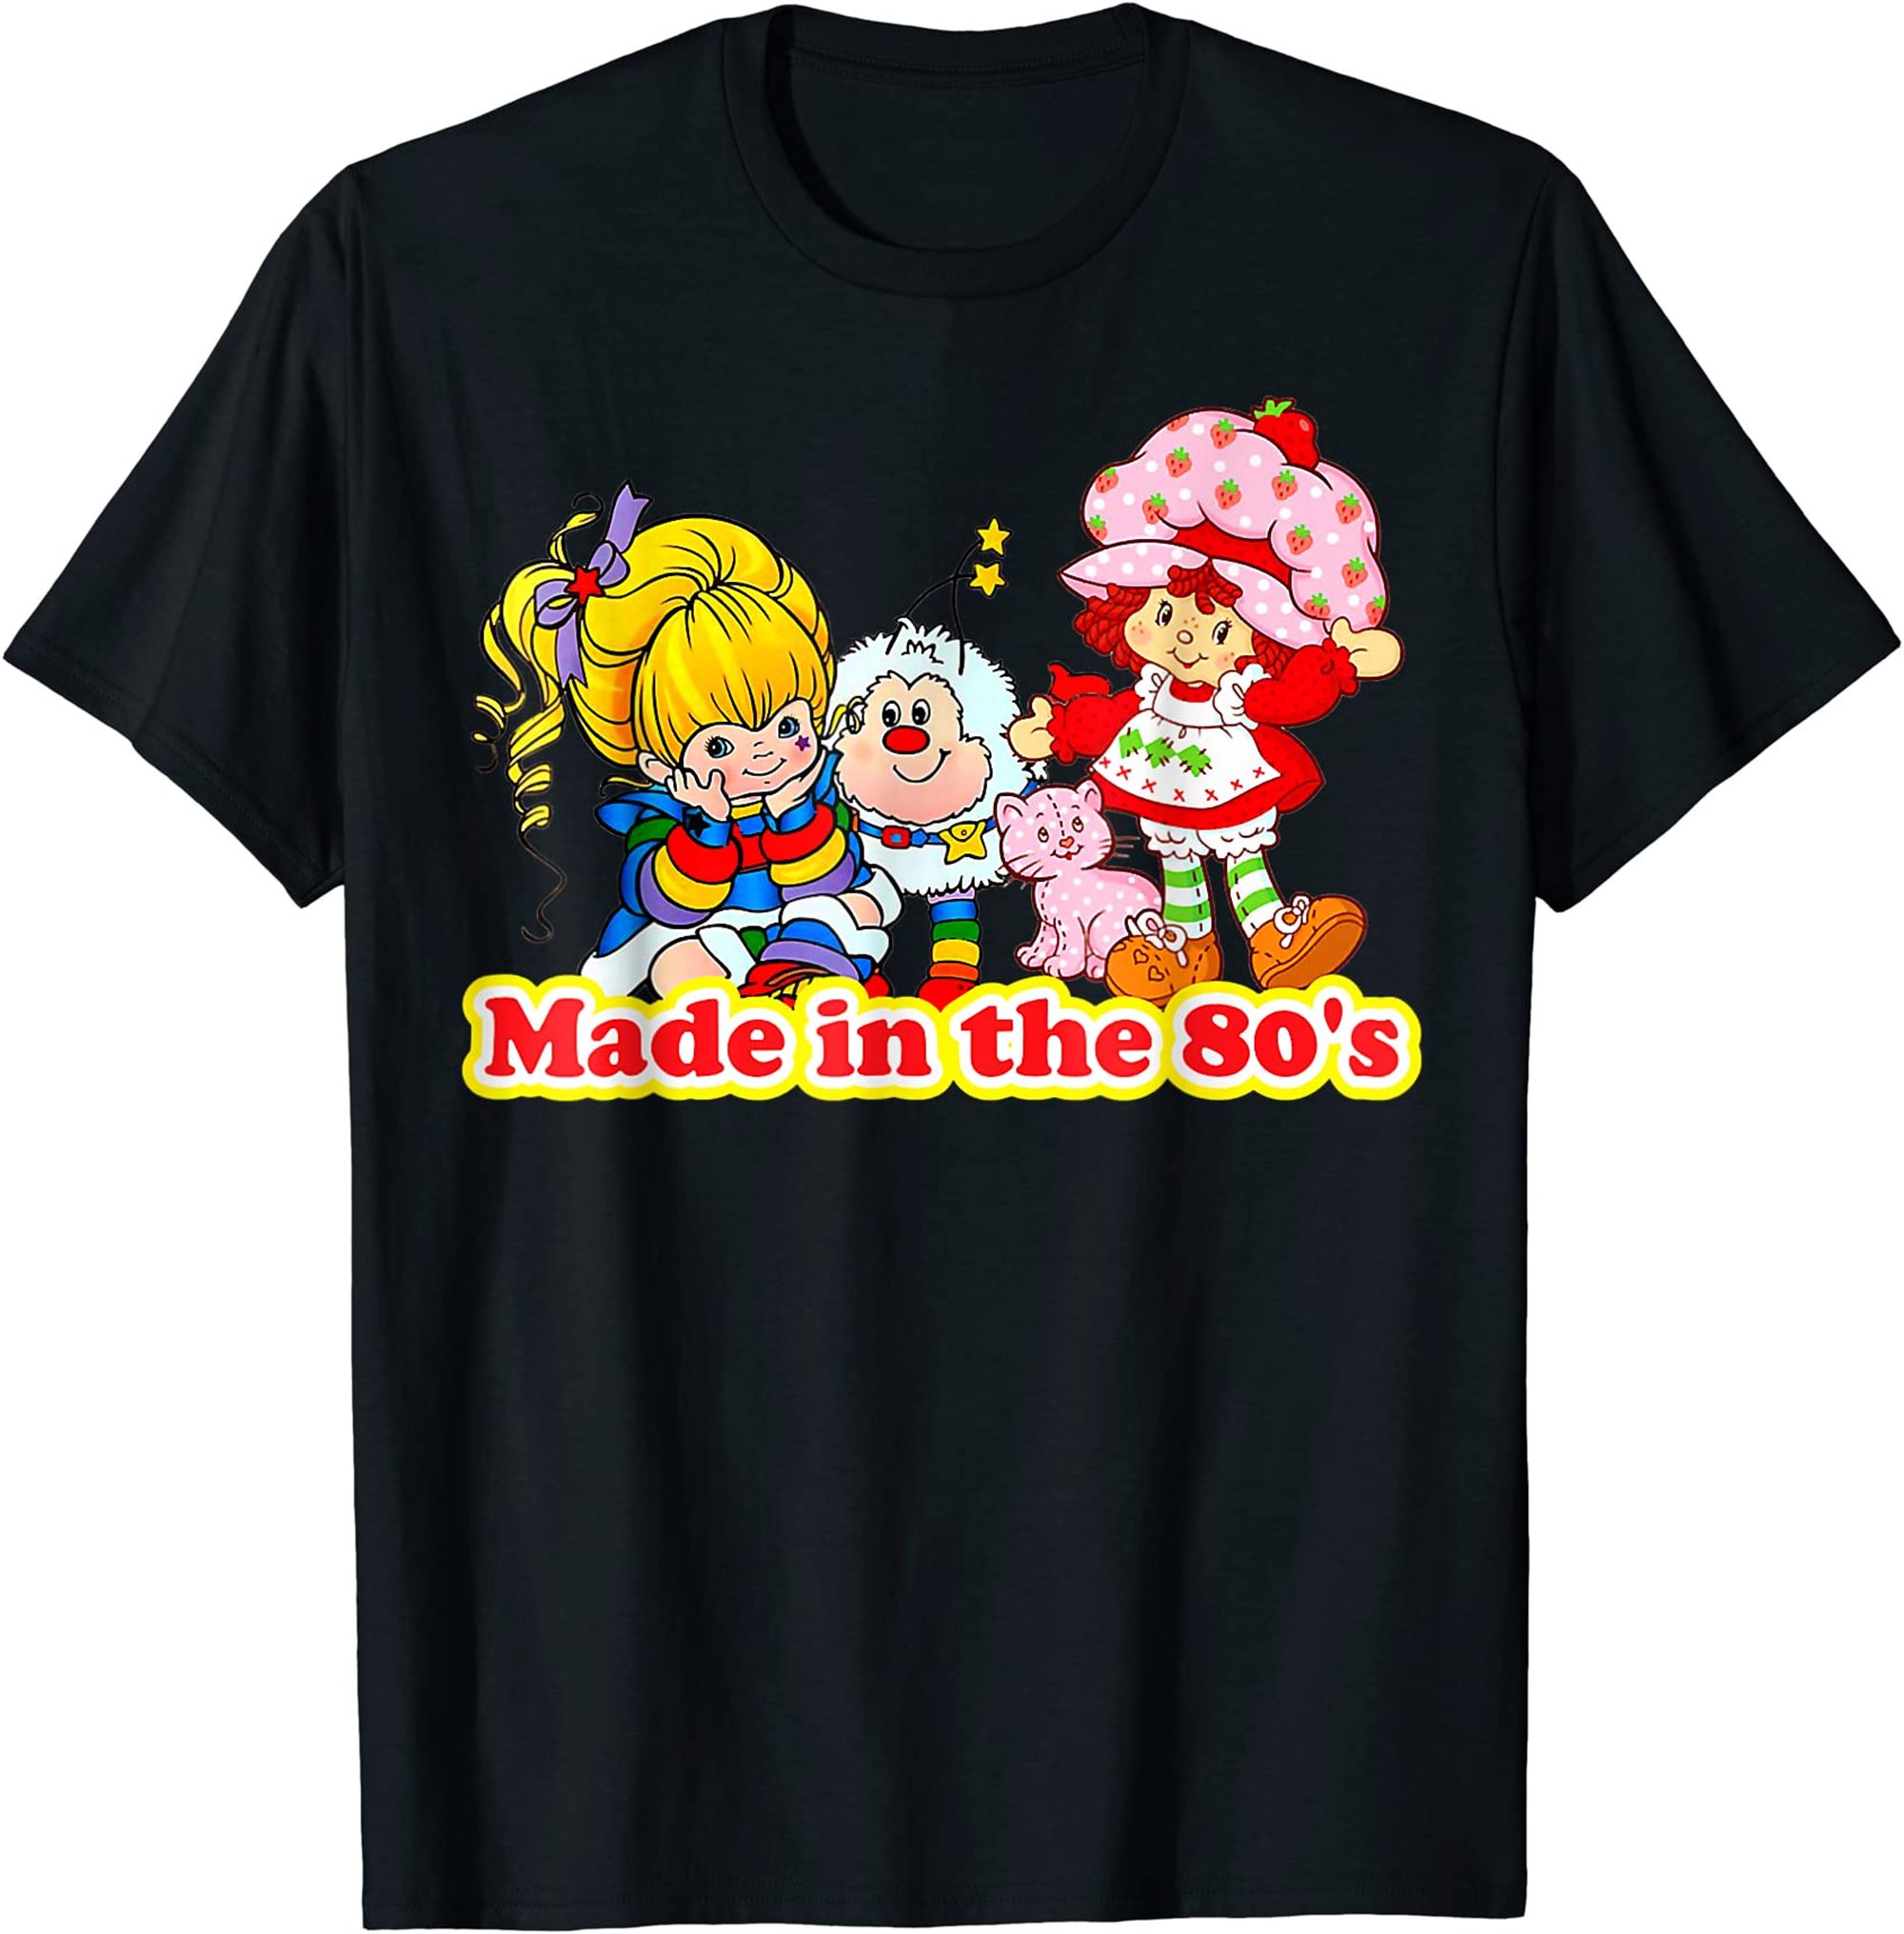 Made In The 80s Babyretro Vintage Nostalgia Birth Year 1980s T-shirt Plus Size Up To 5xl